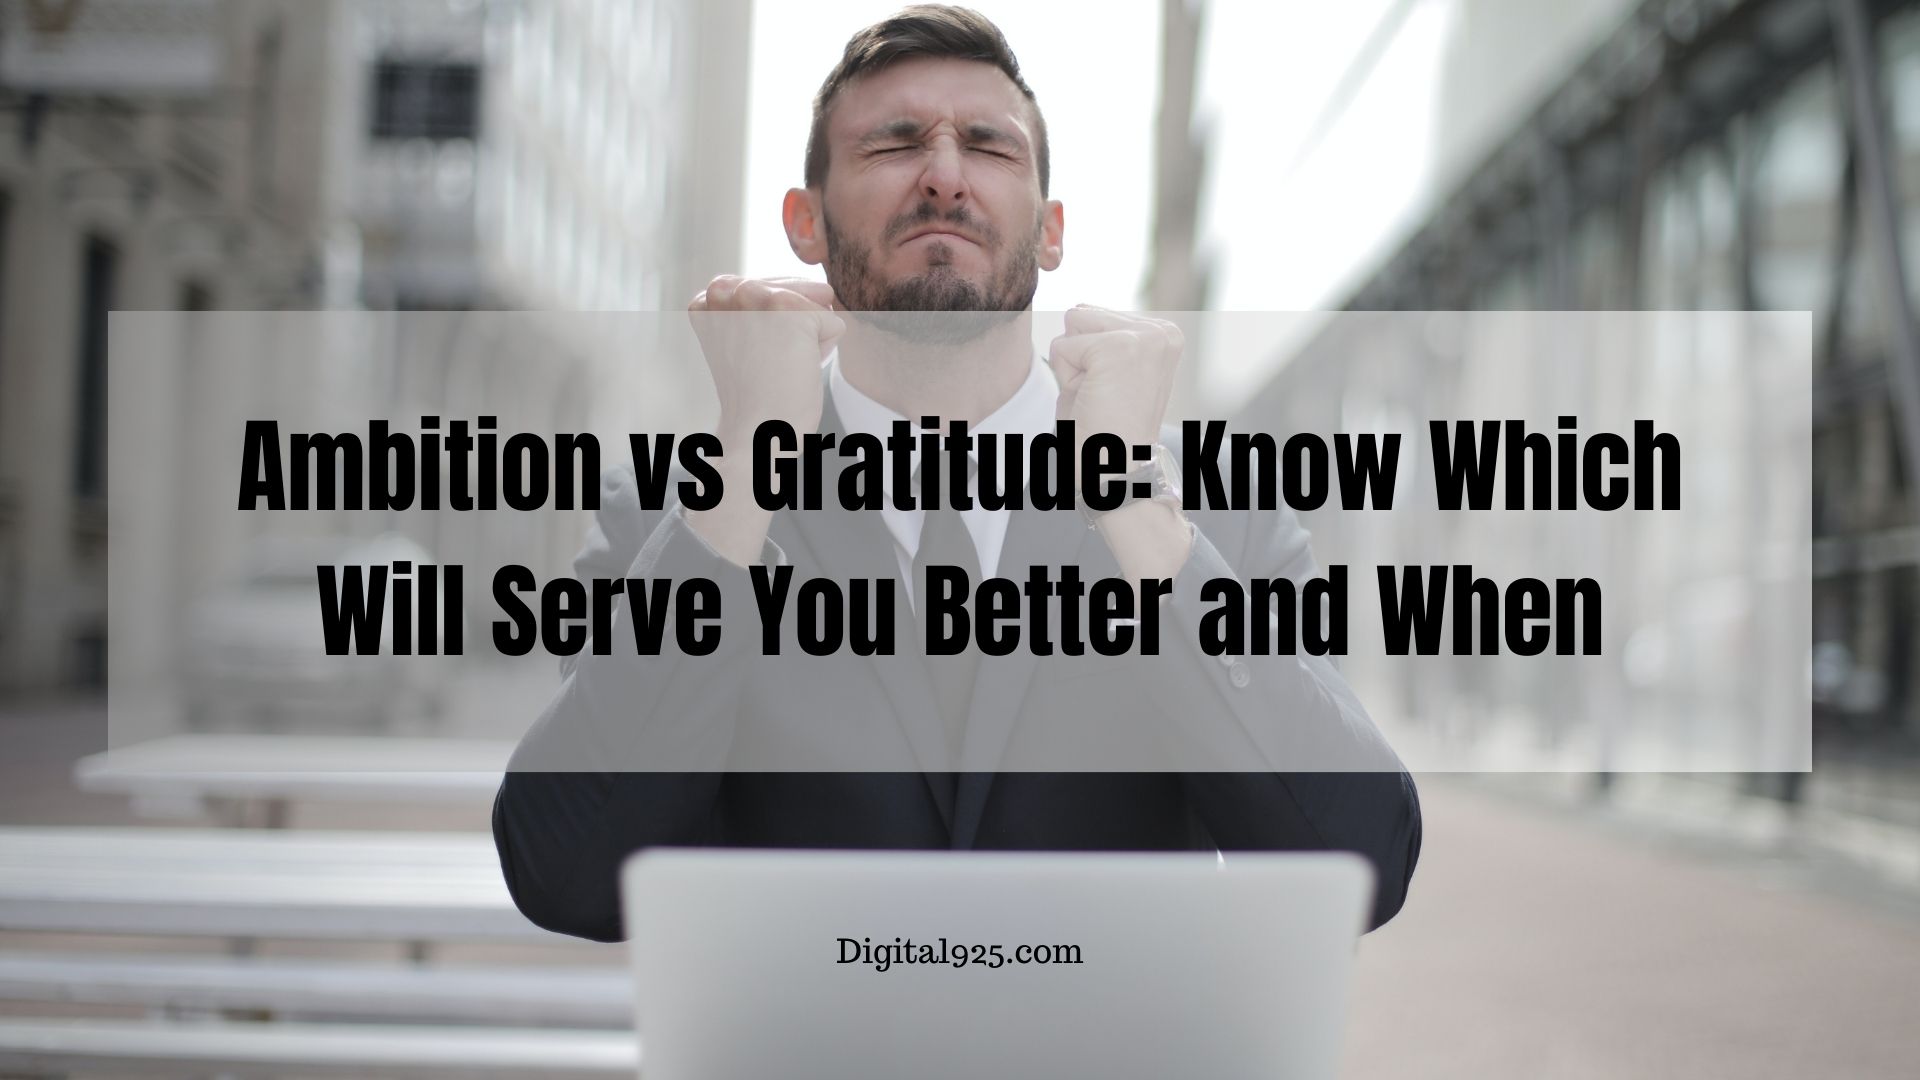 Ambition vs Gratitude: Know Which Will Serve You Better and When